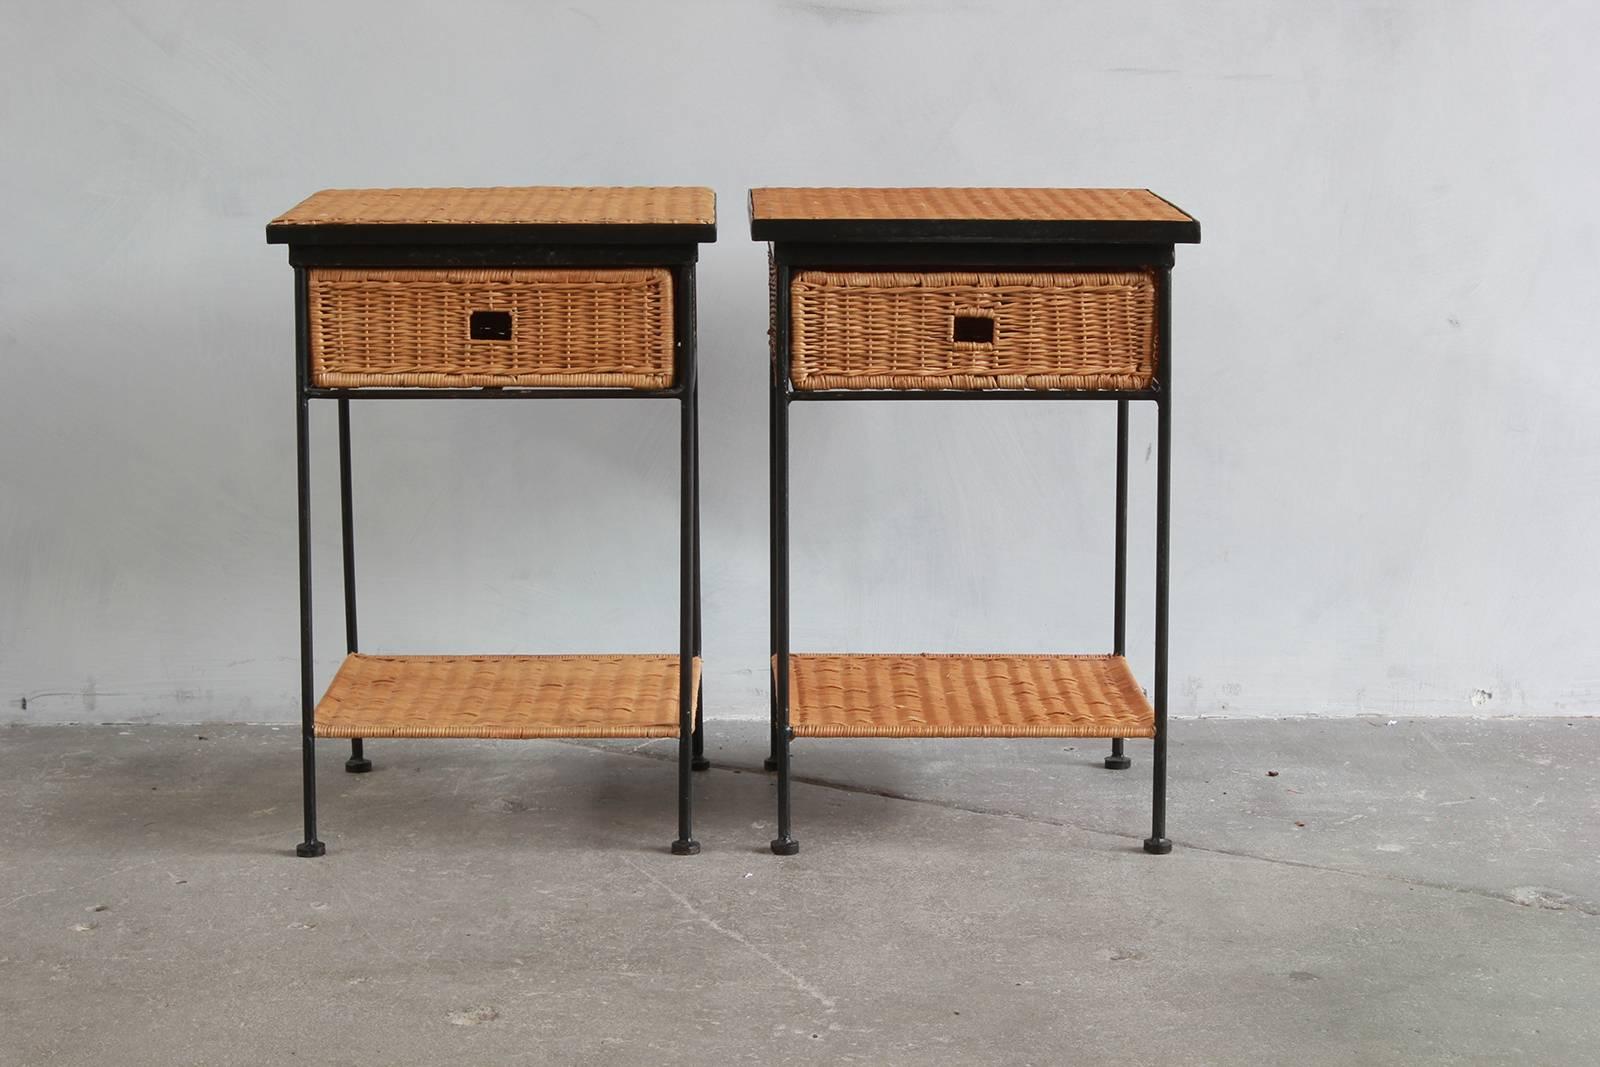 Pair of iron and wicker side tables with slide out drawers and lower shelf.